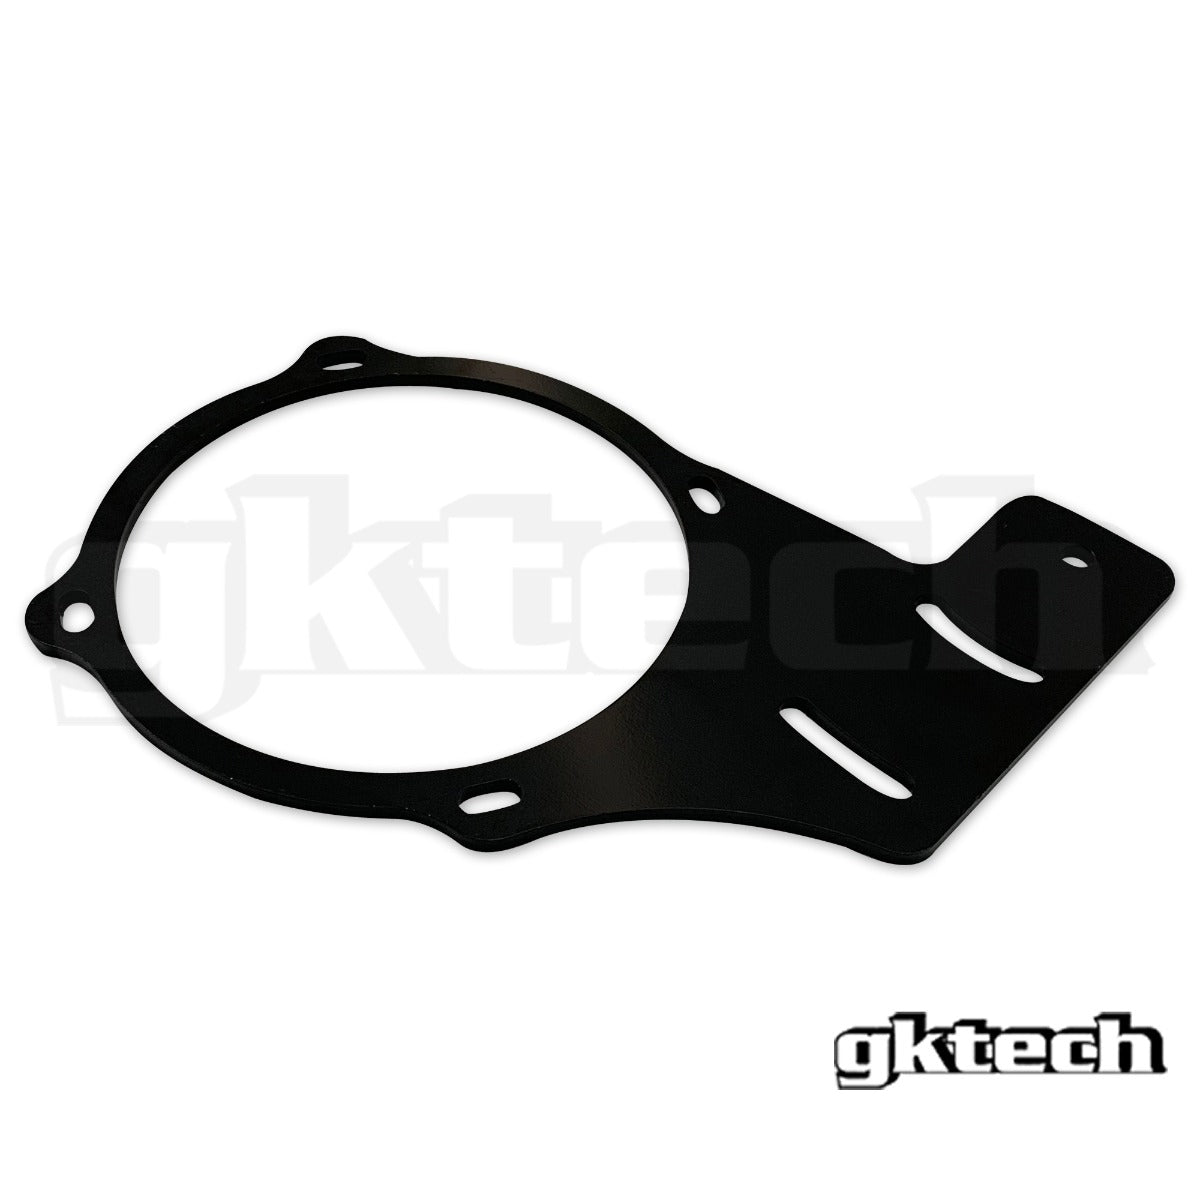 S-chassis car specific handbrake mount